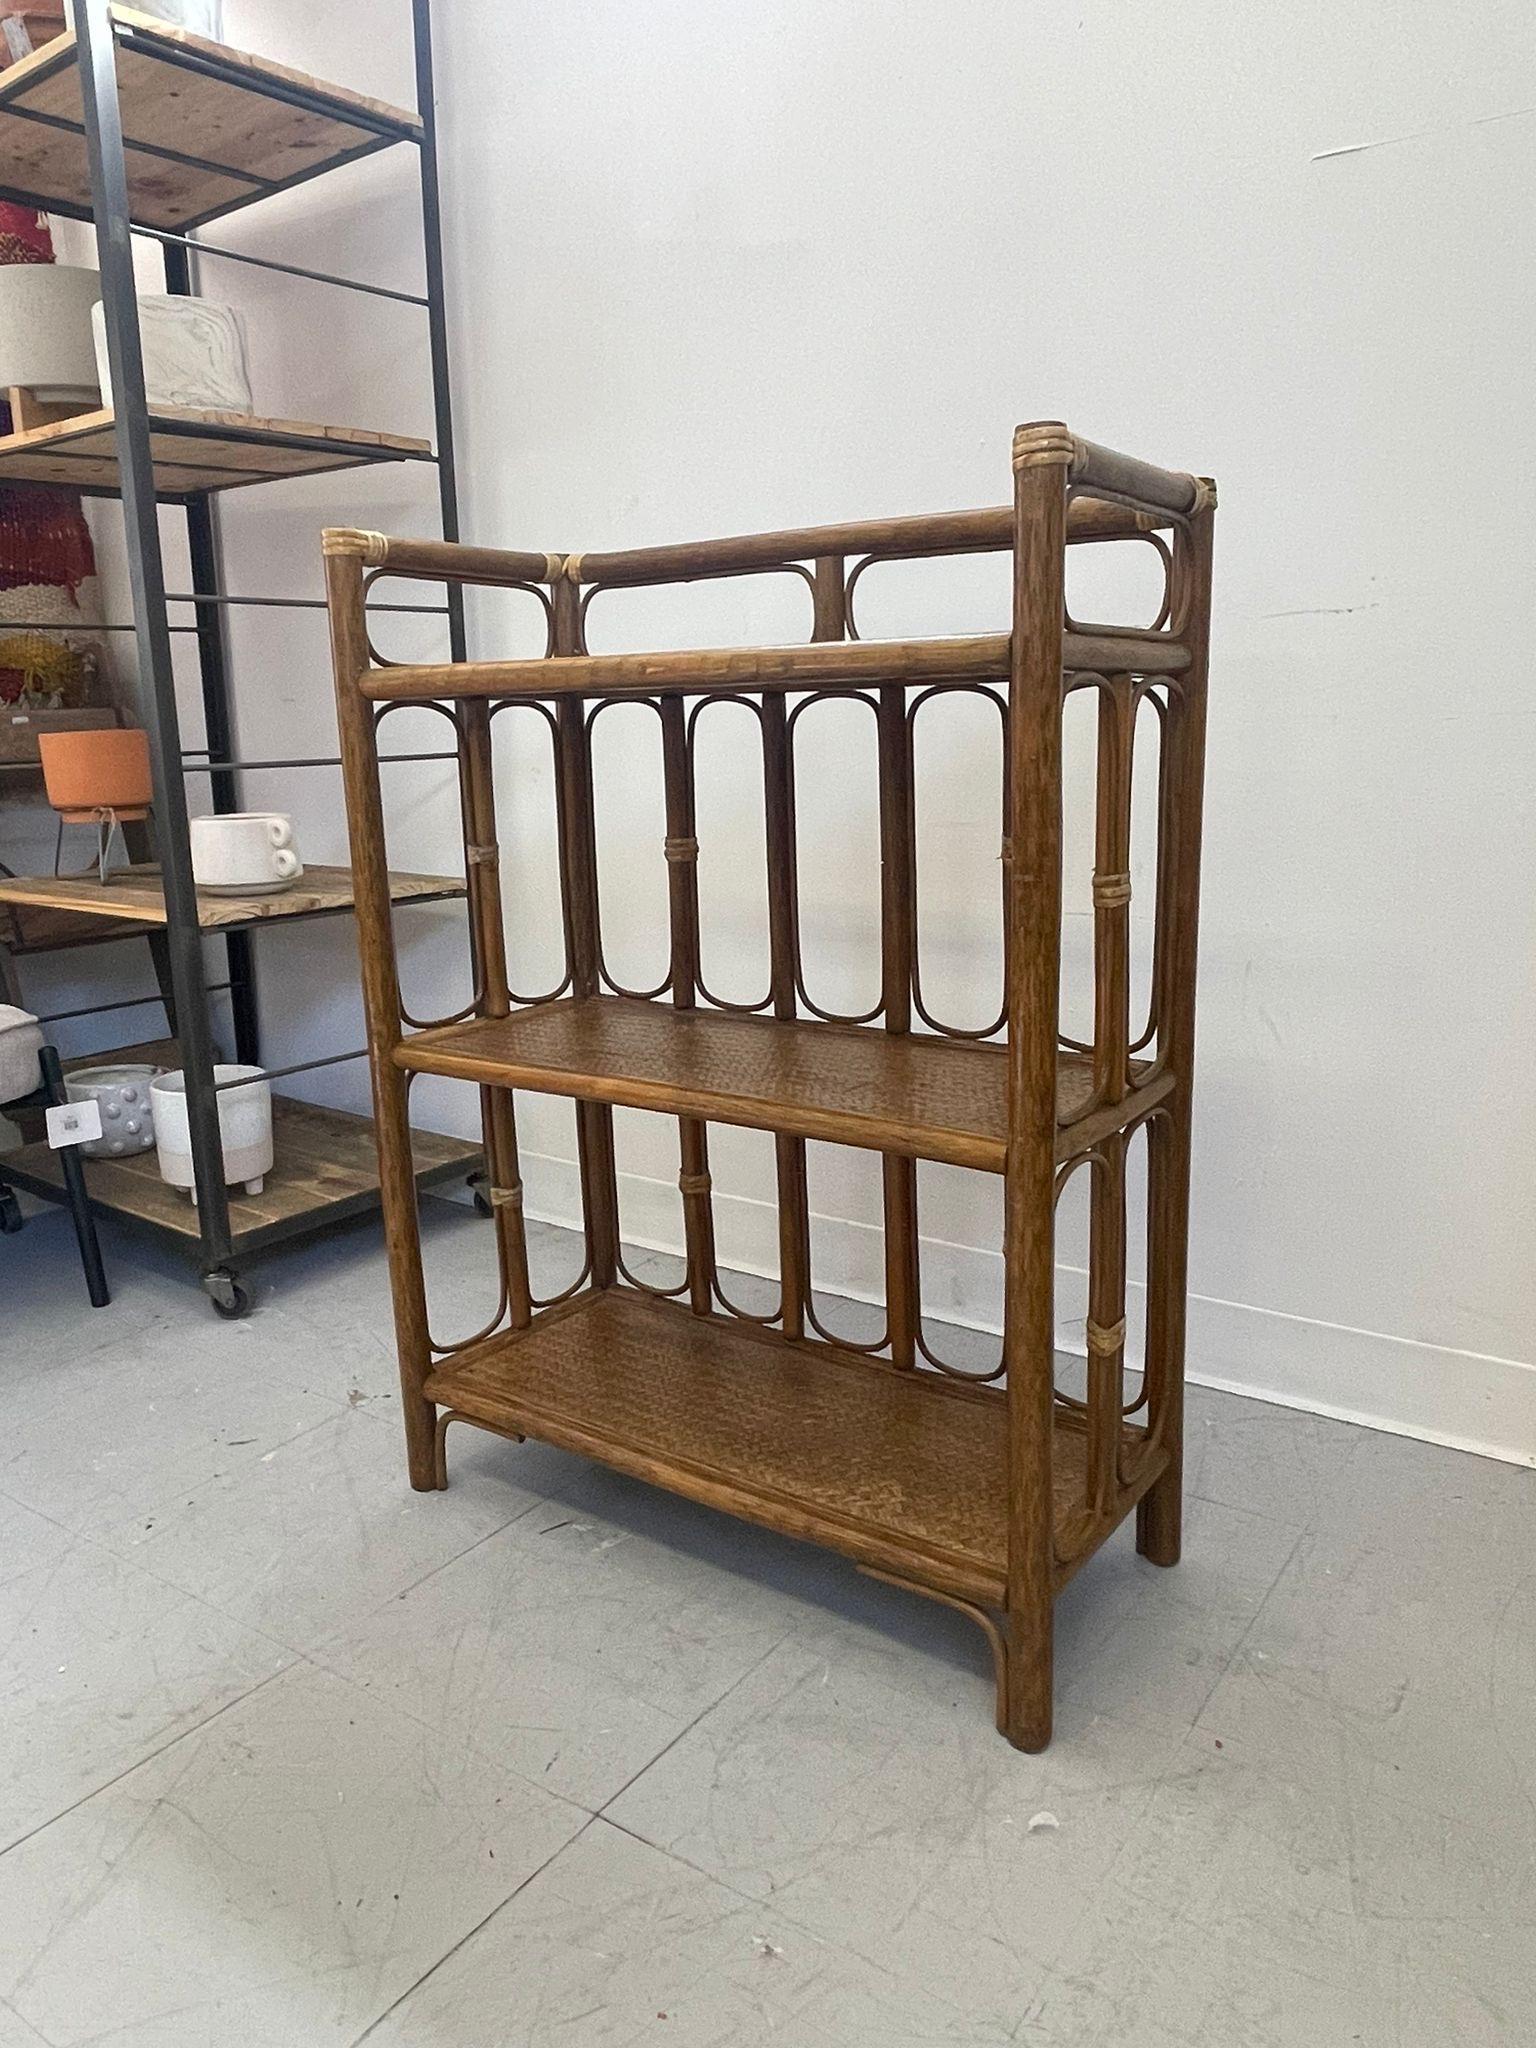 Retro Bookshelf with Woven wicker Shelves. Vintage Condition. Consistent with Age. Wear and Tear as Pictured ( online purchase only)

Dimensions. 26 W ; 11 D ; 35 H